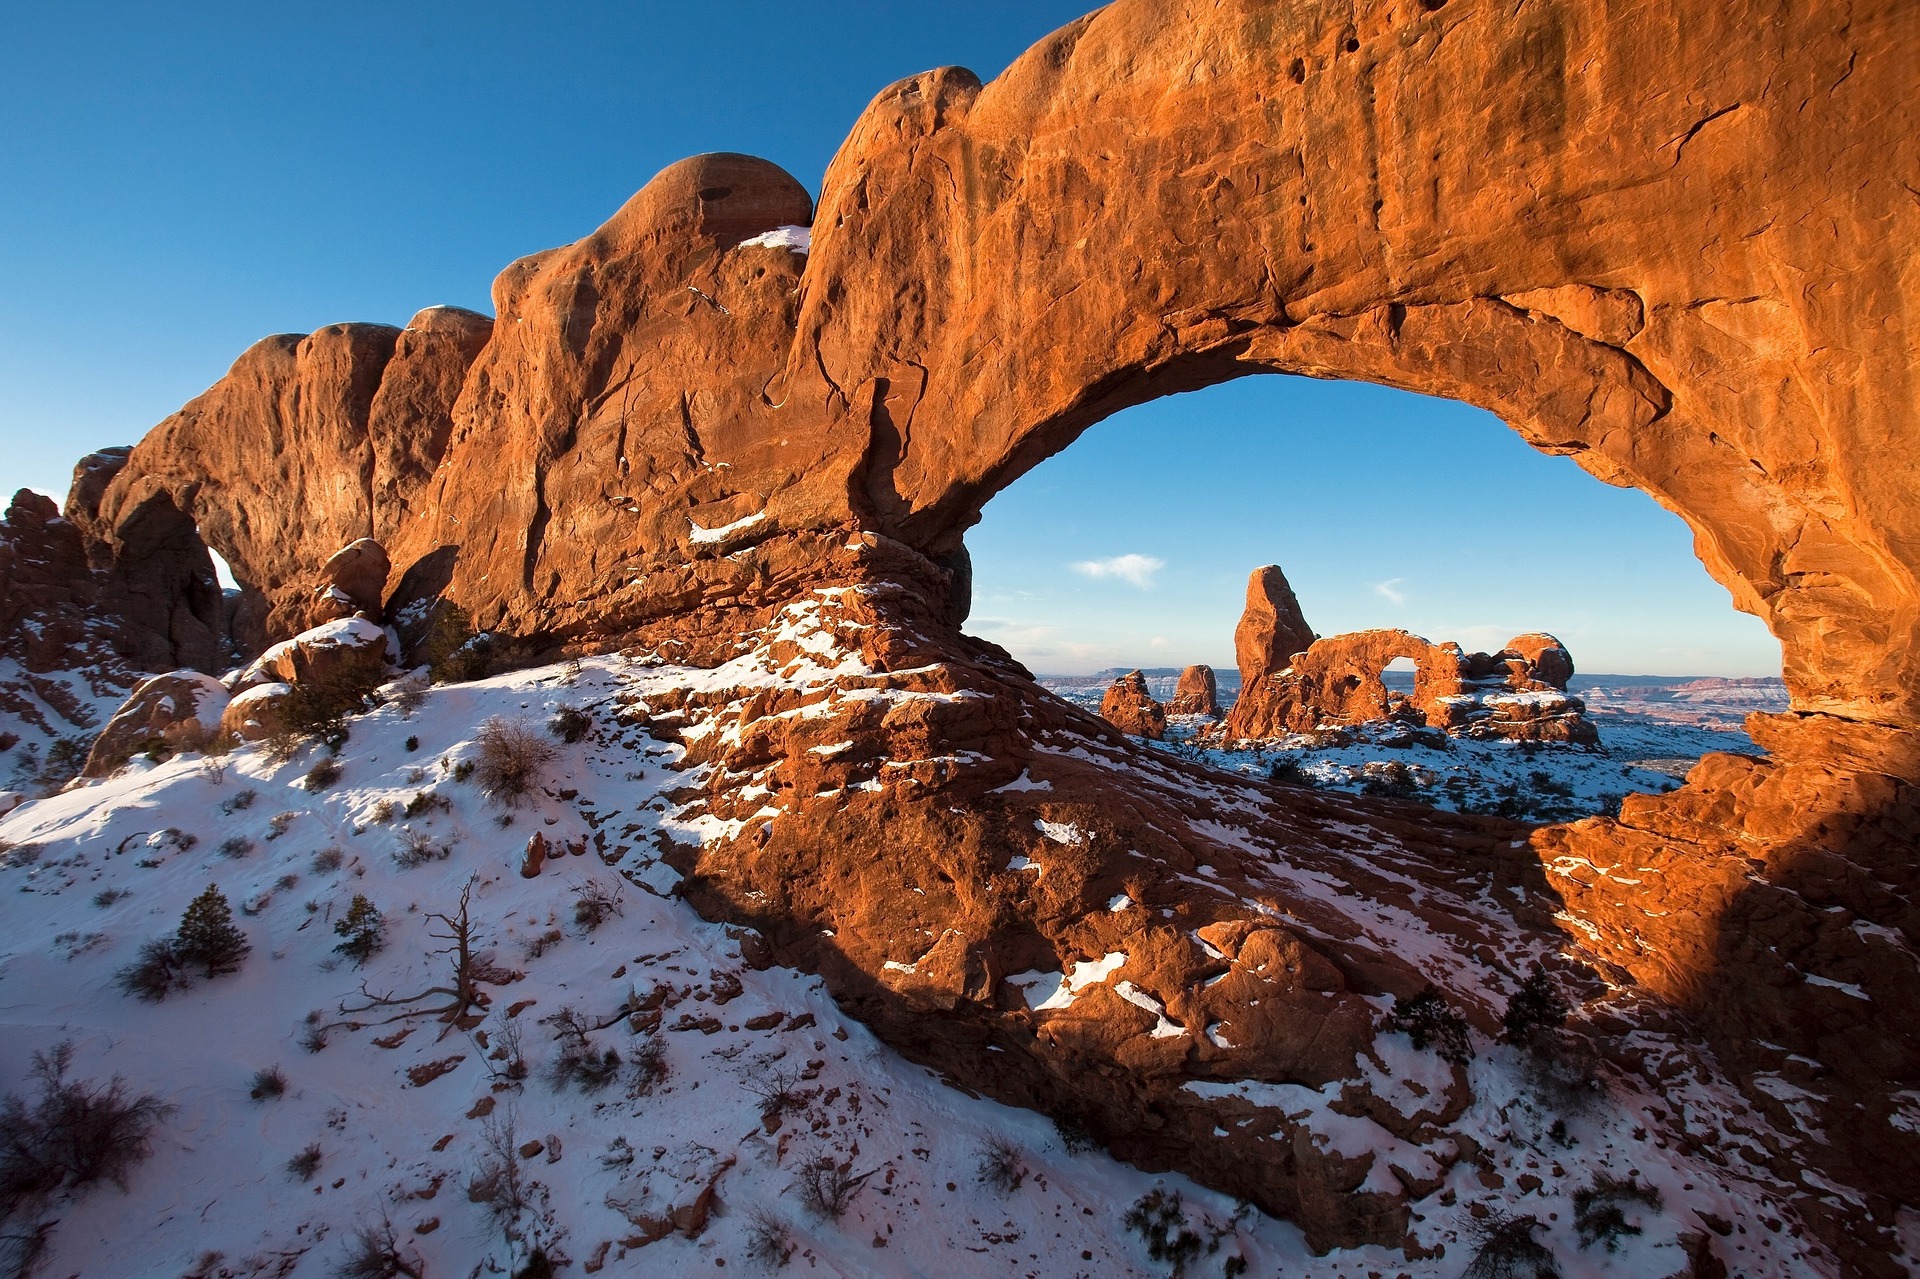 Utah arched rock formation and snow-covered ground